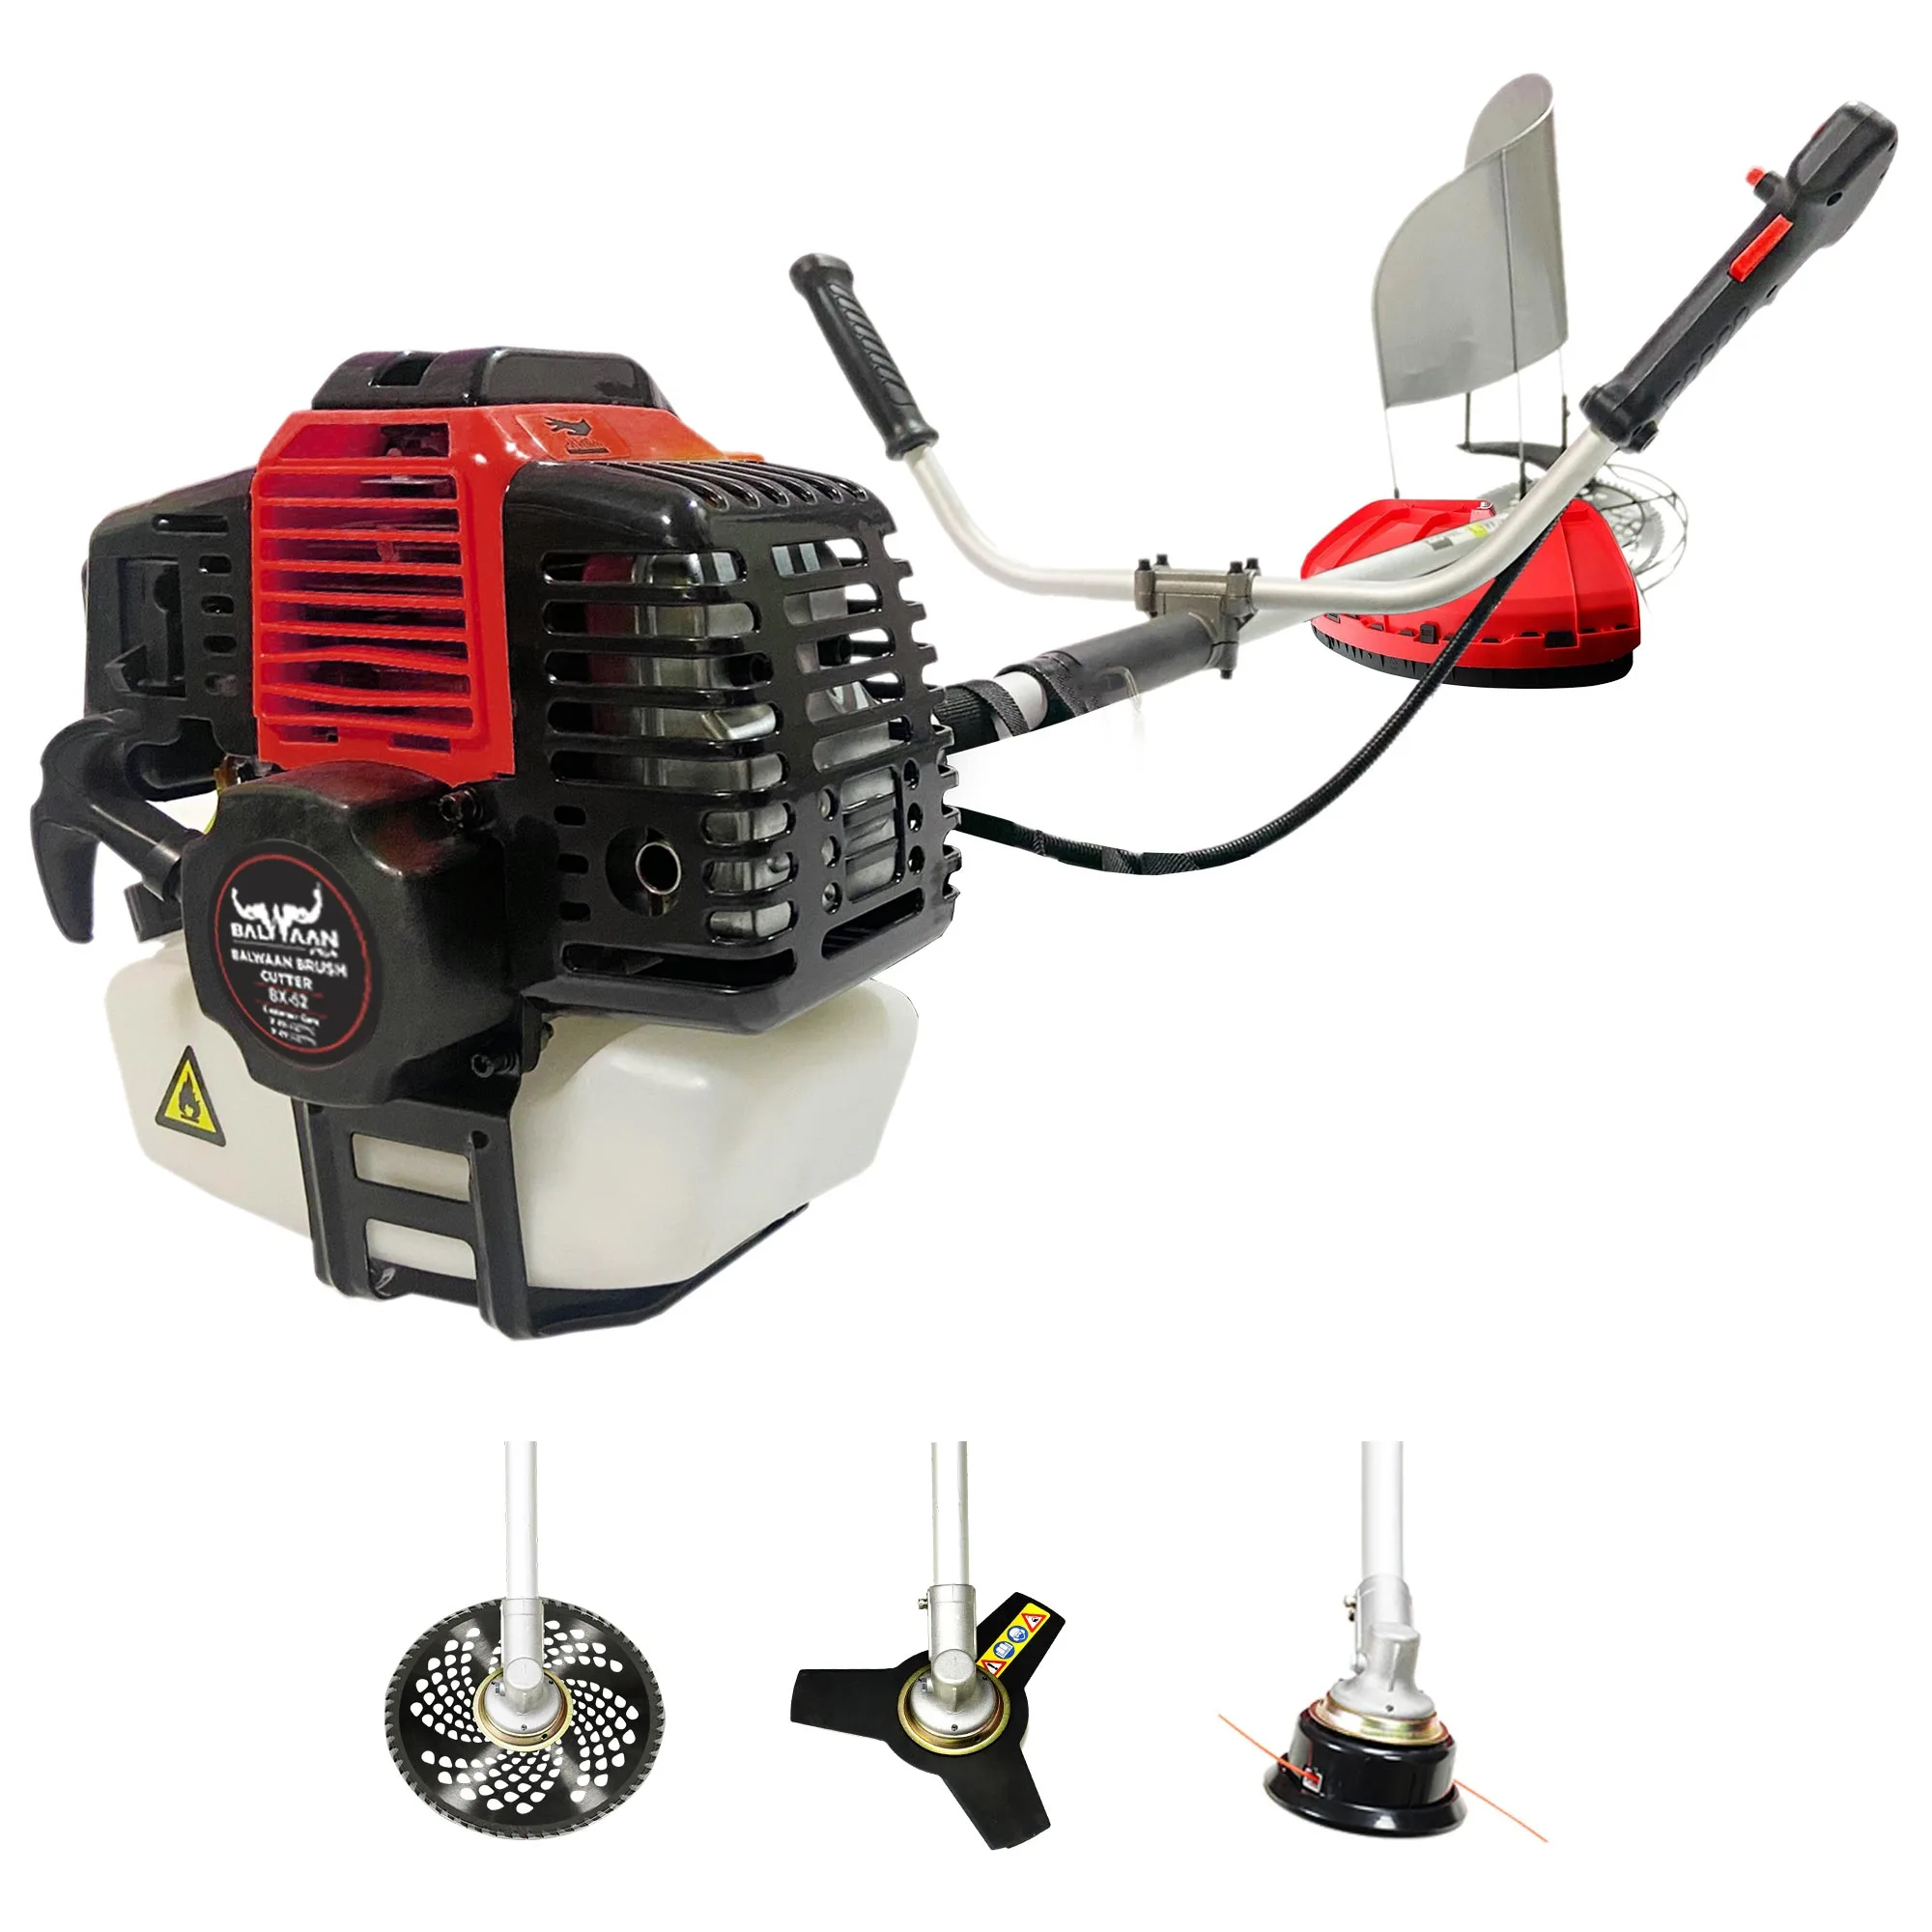 Balwaan-brush-cutter-bx-52-with-its-three-attachments